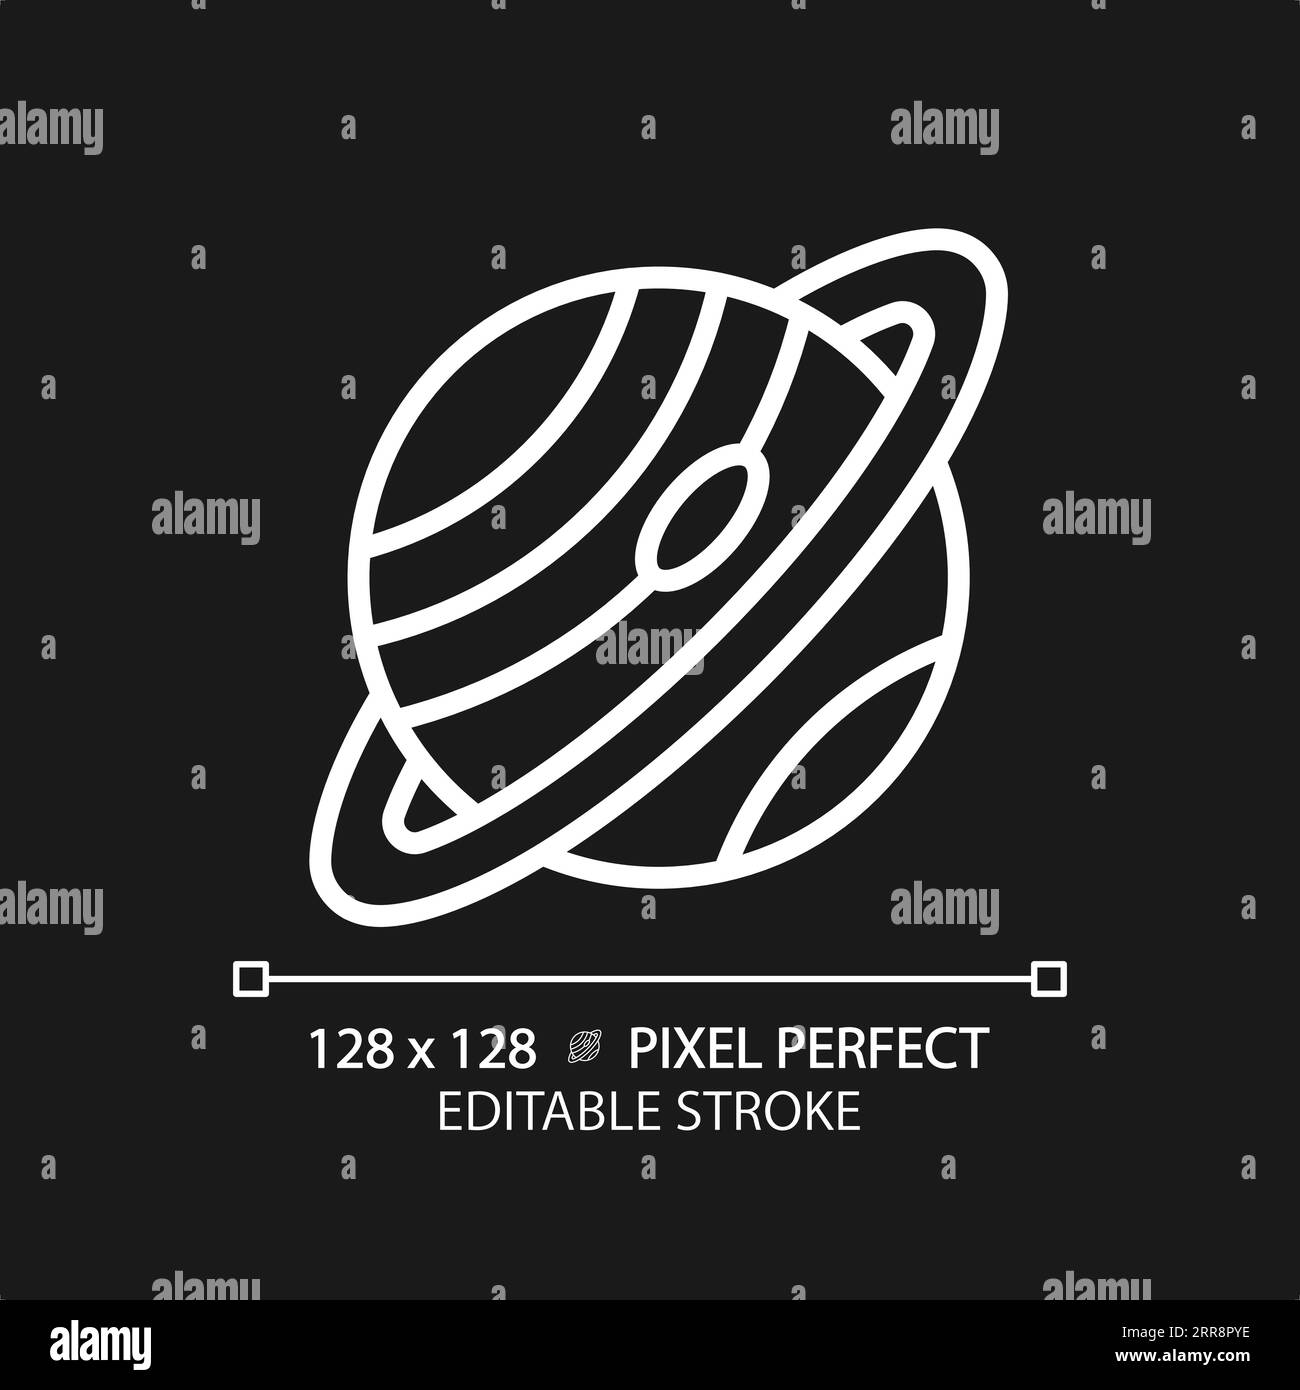 Saturn pixel perfect white linear icon for dark theme Stock Vector